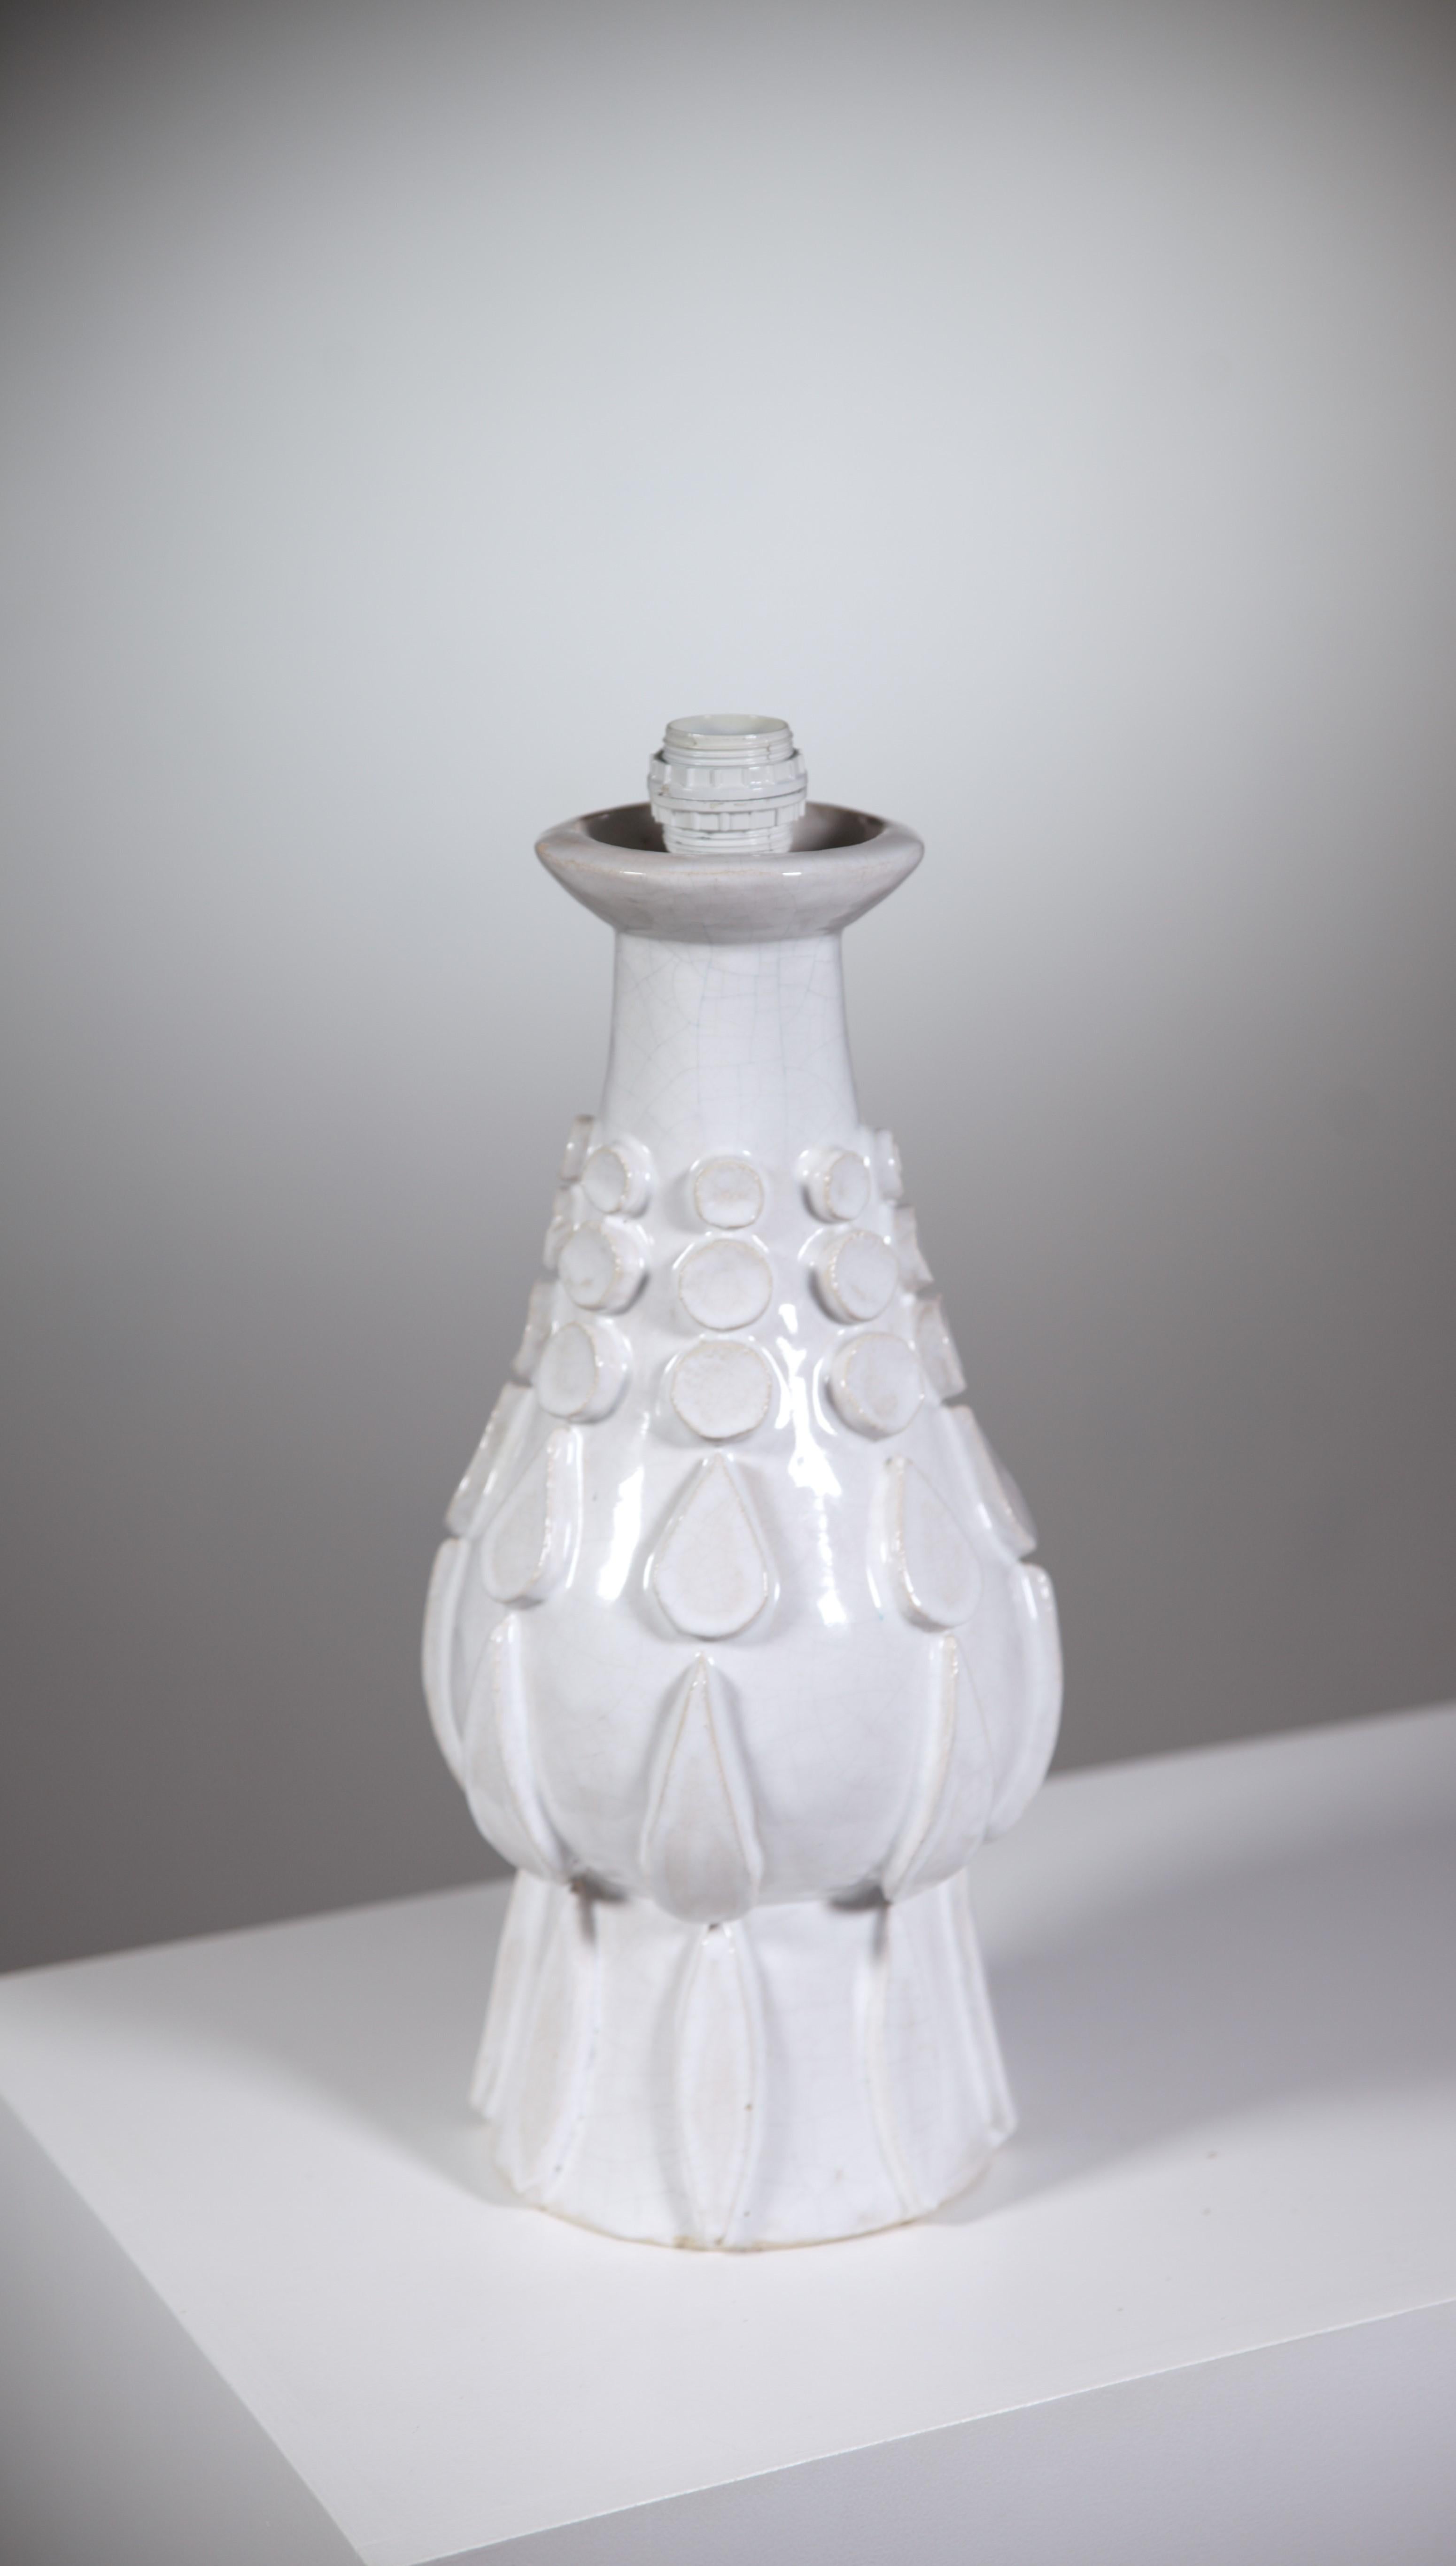 A Ceramic Lamp by Marie Kaikinger.

France 1970s

Nice white cracked ceramic.

Mention : small scratches